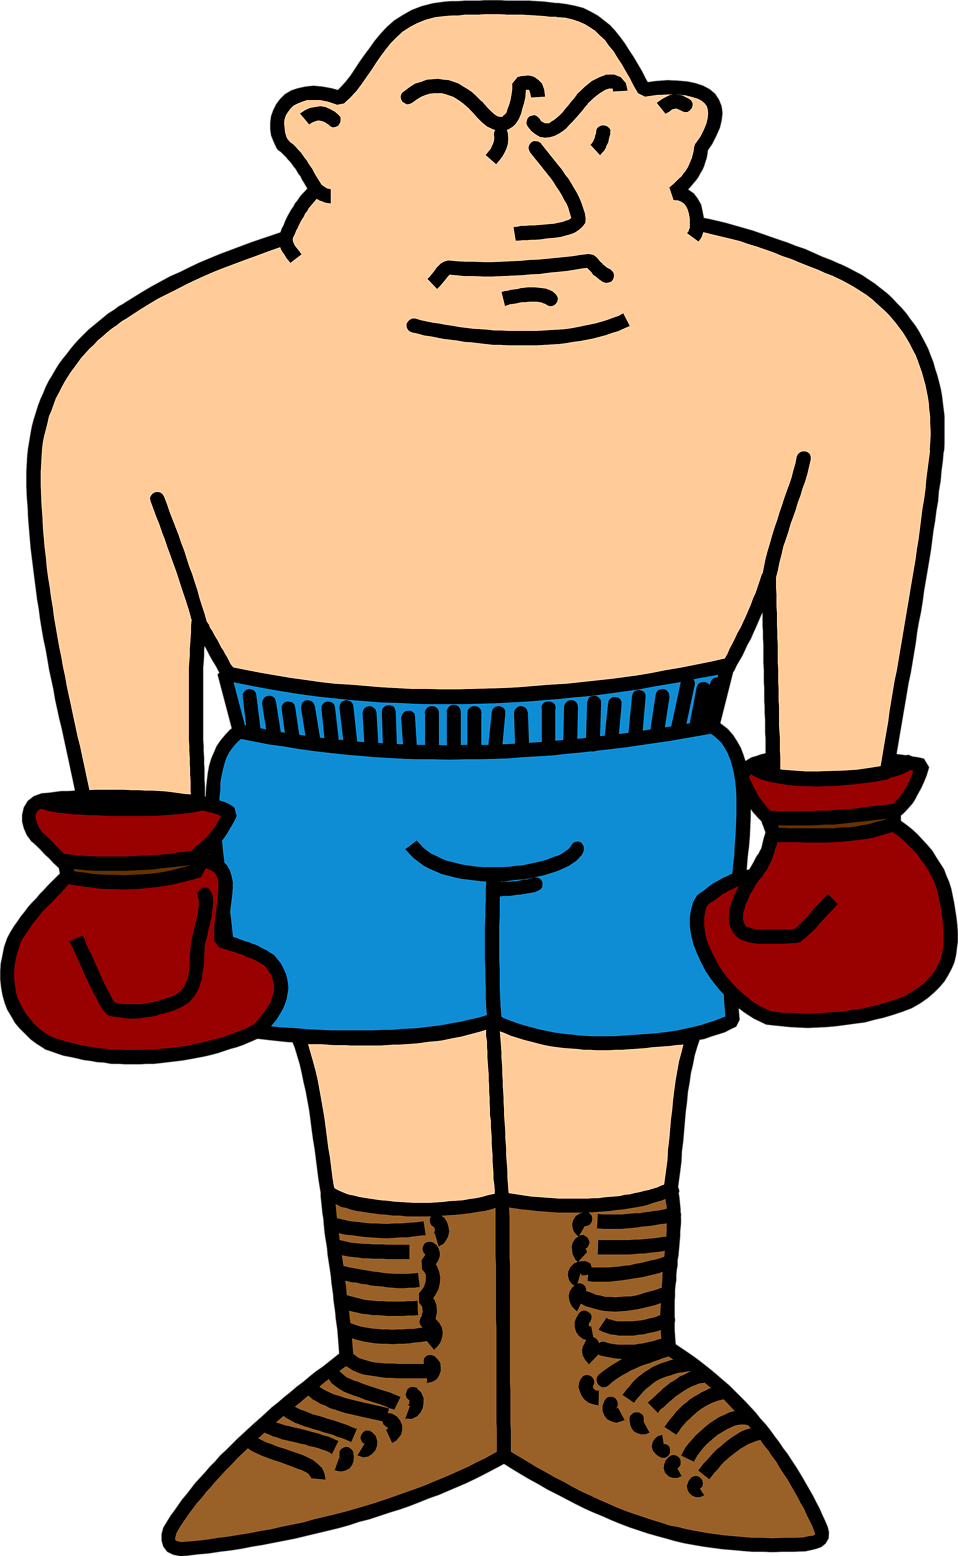 Muscle clipart clear background. Boxing free stock photo